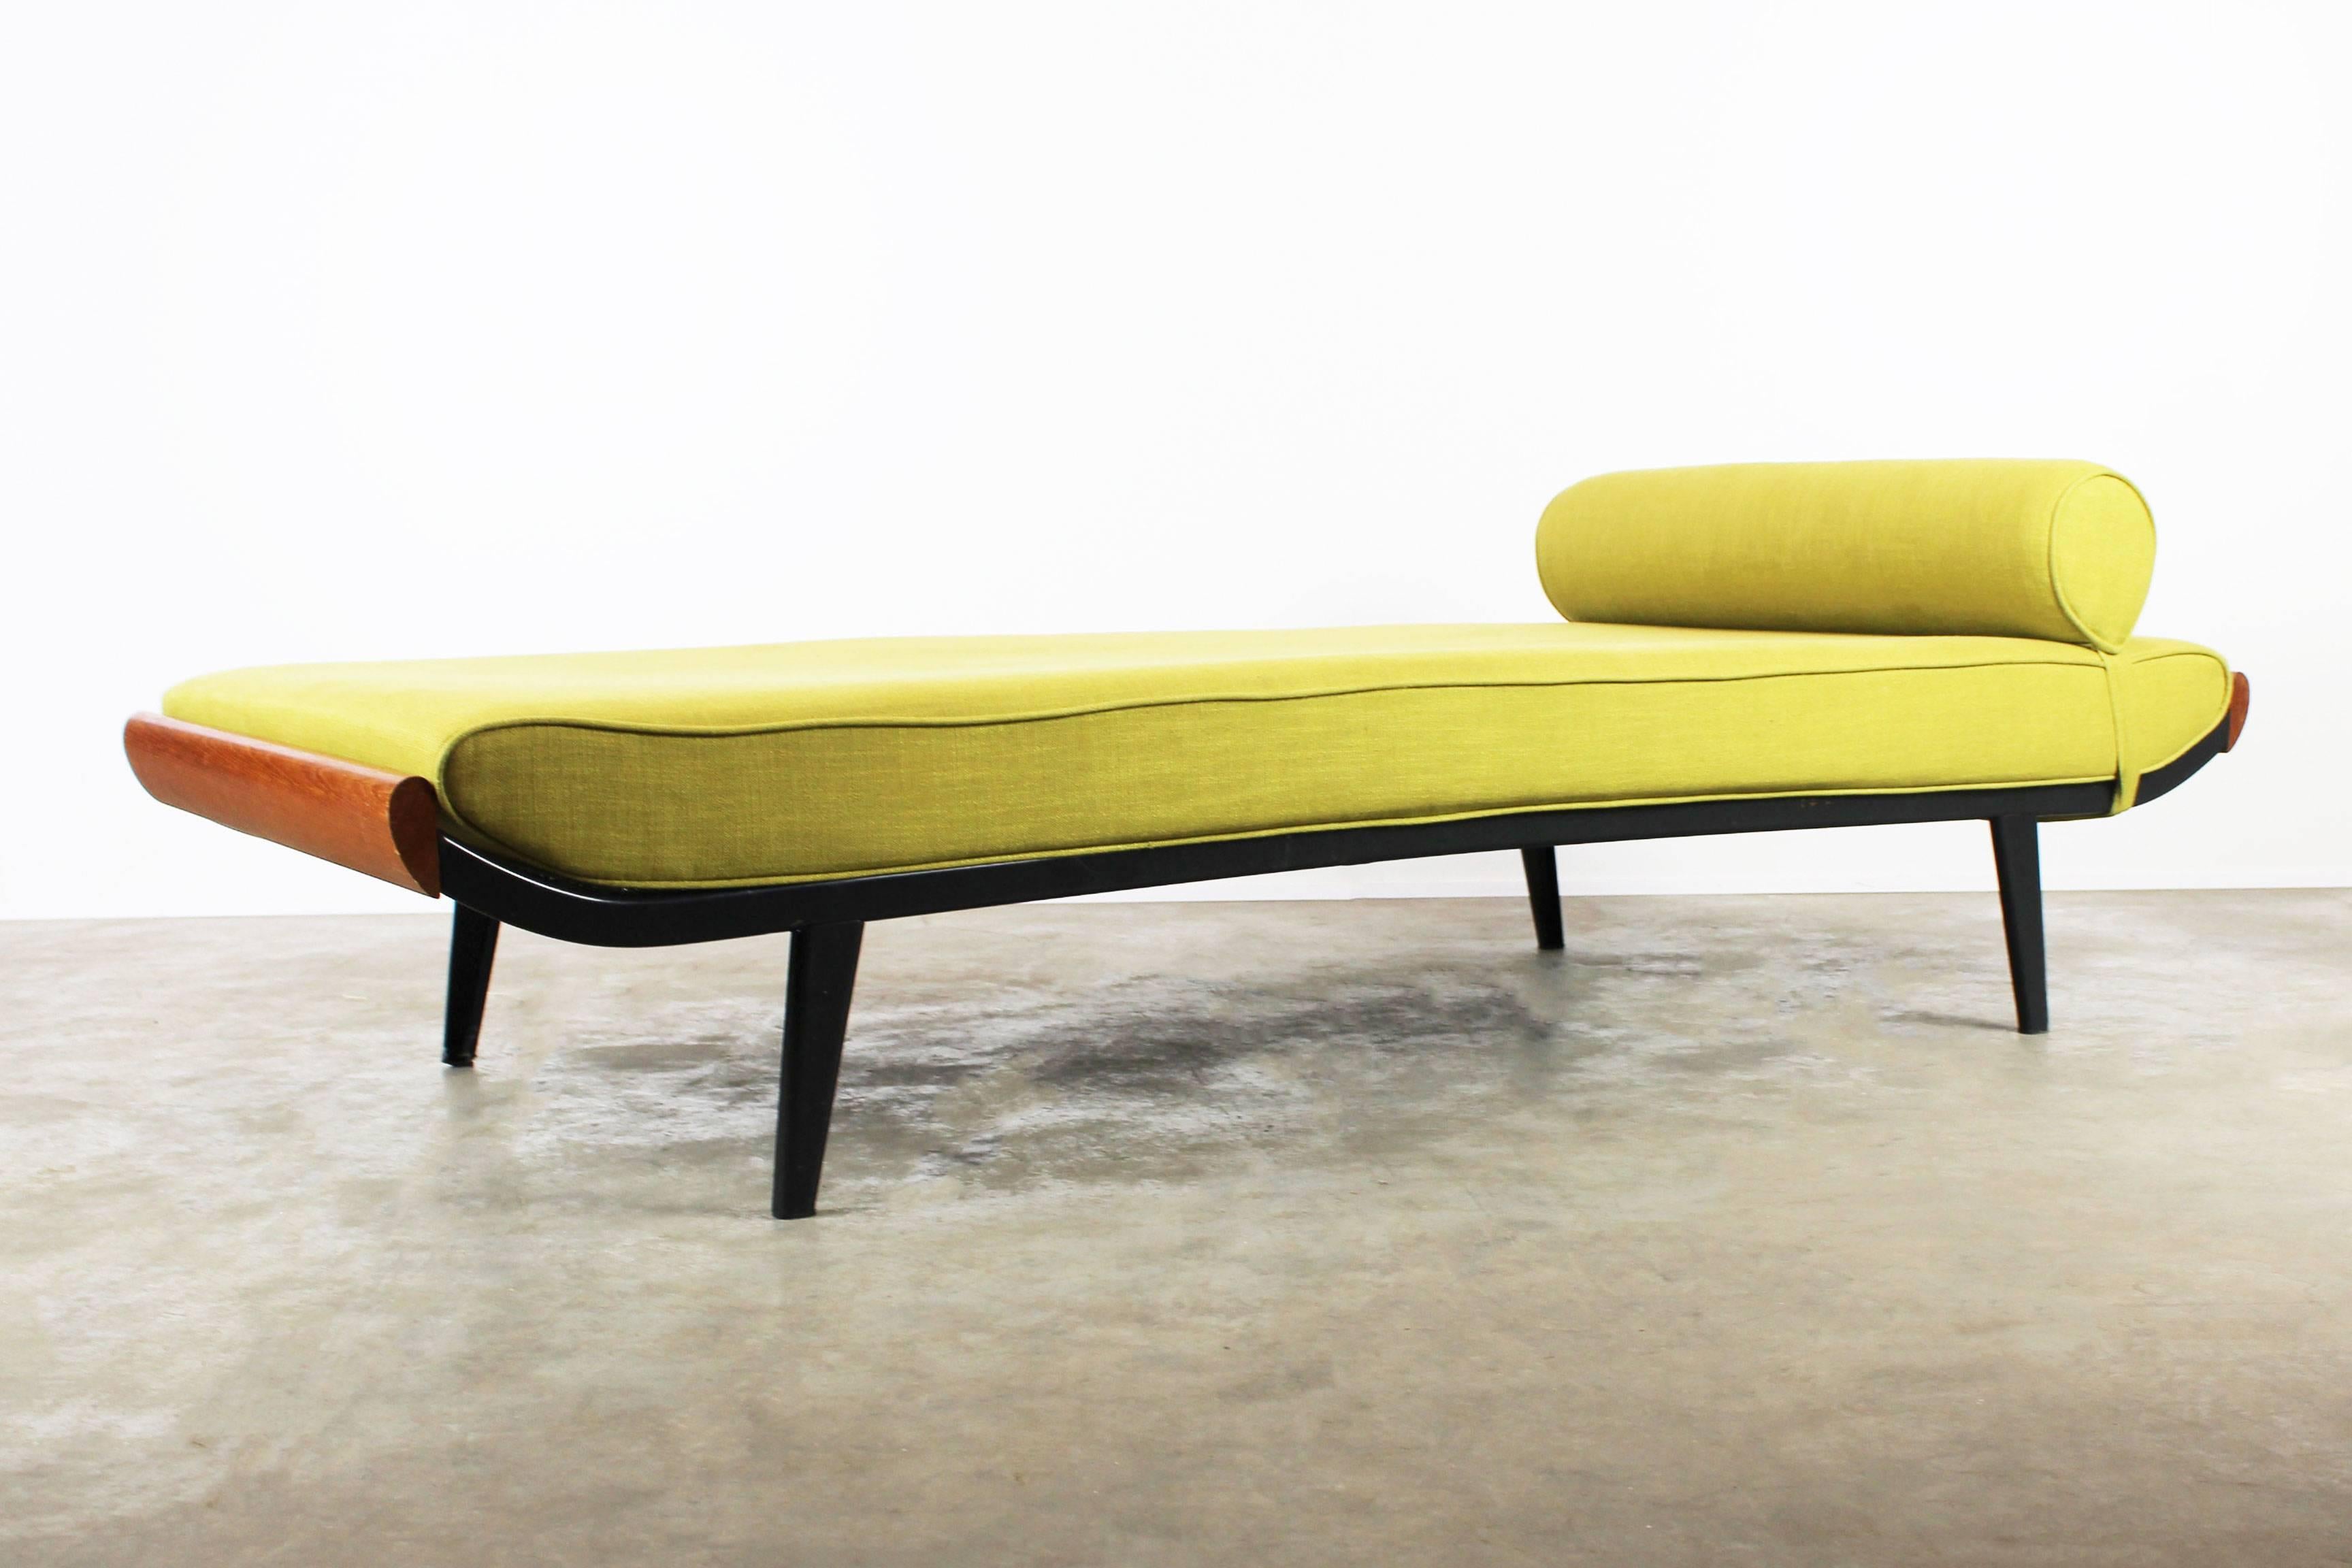 Cleopatra daybed designed by Dick Cordemeijer for Auping, 1953. Minimalist black frame with solid teak head and footrest. Very comfortable and stylish. Fits perfectly in any midcentury or modern interior.